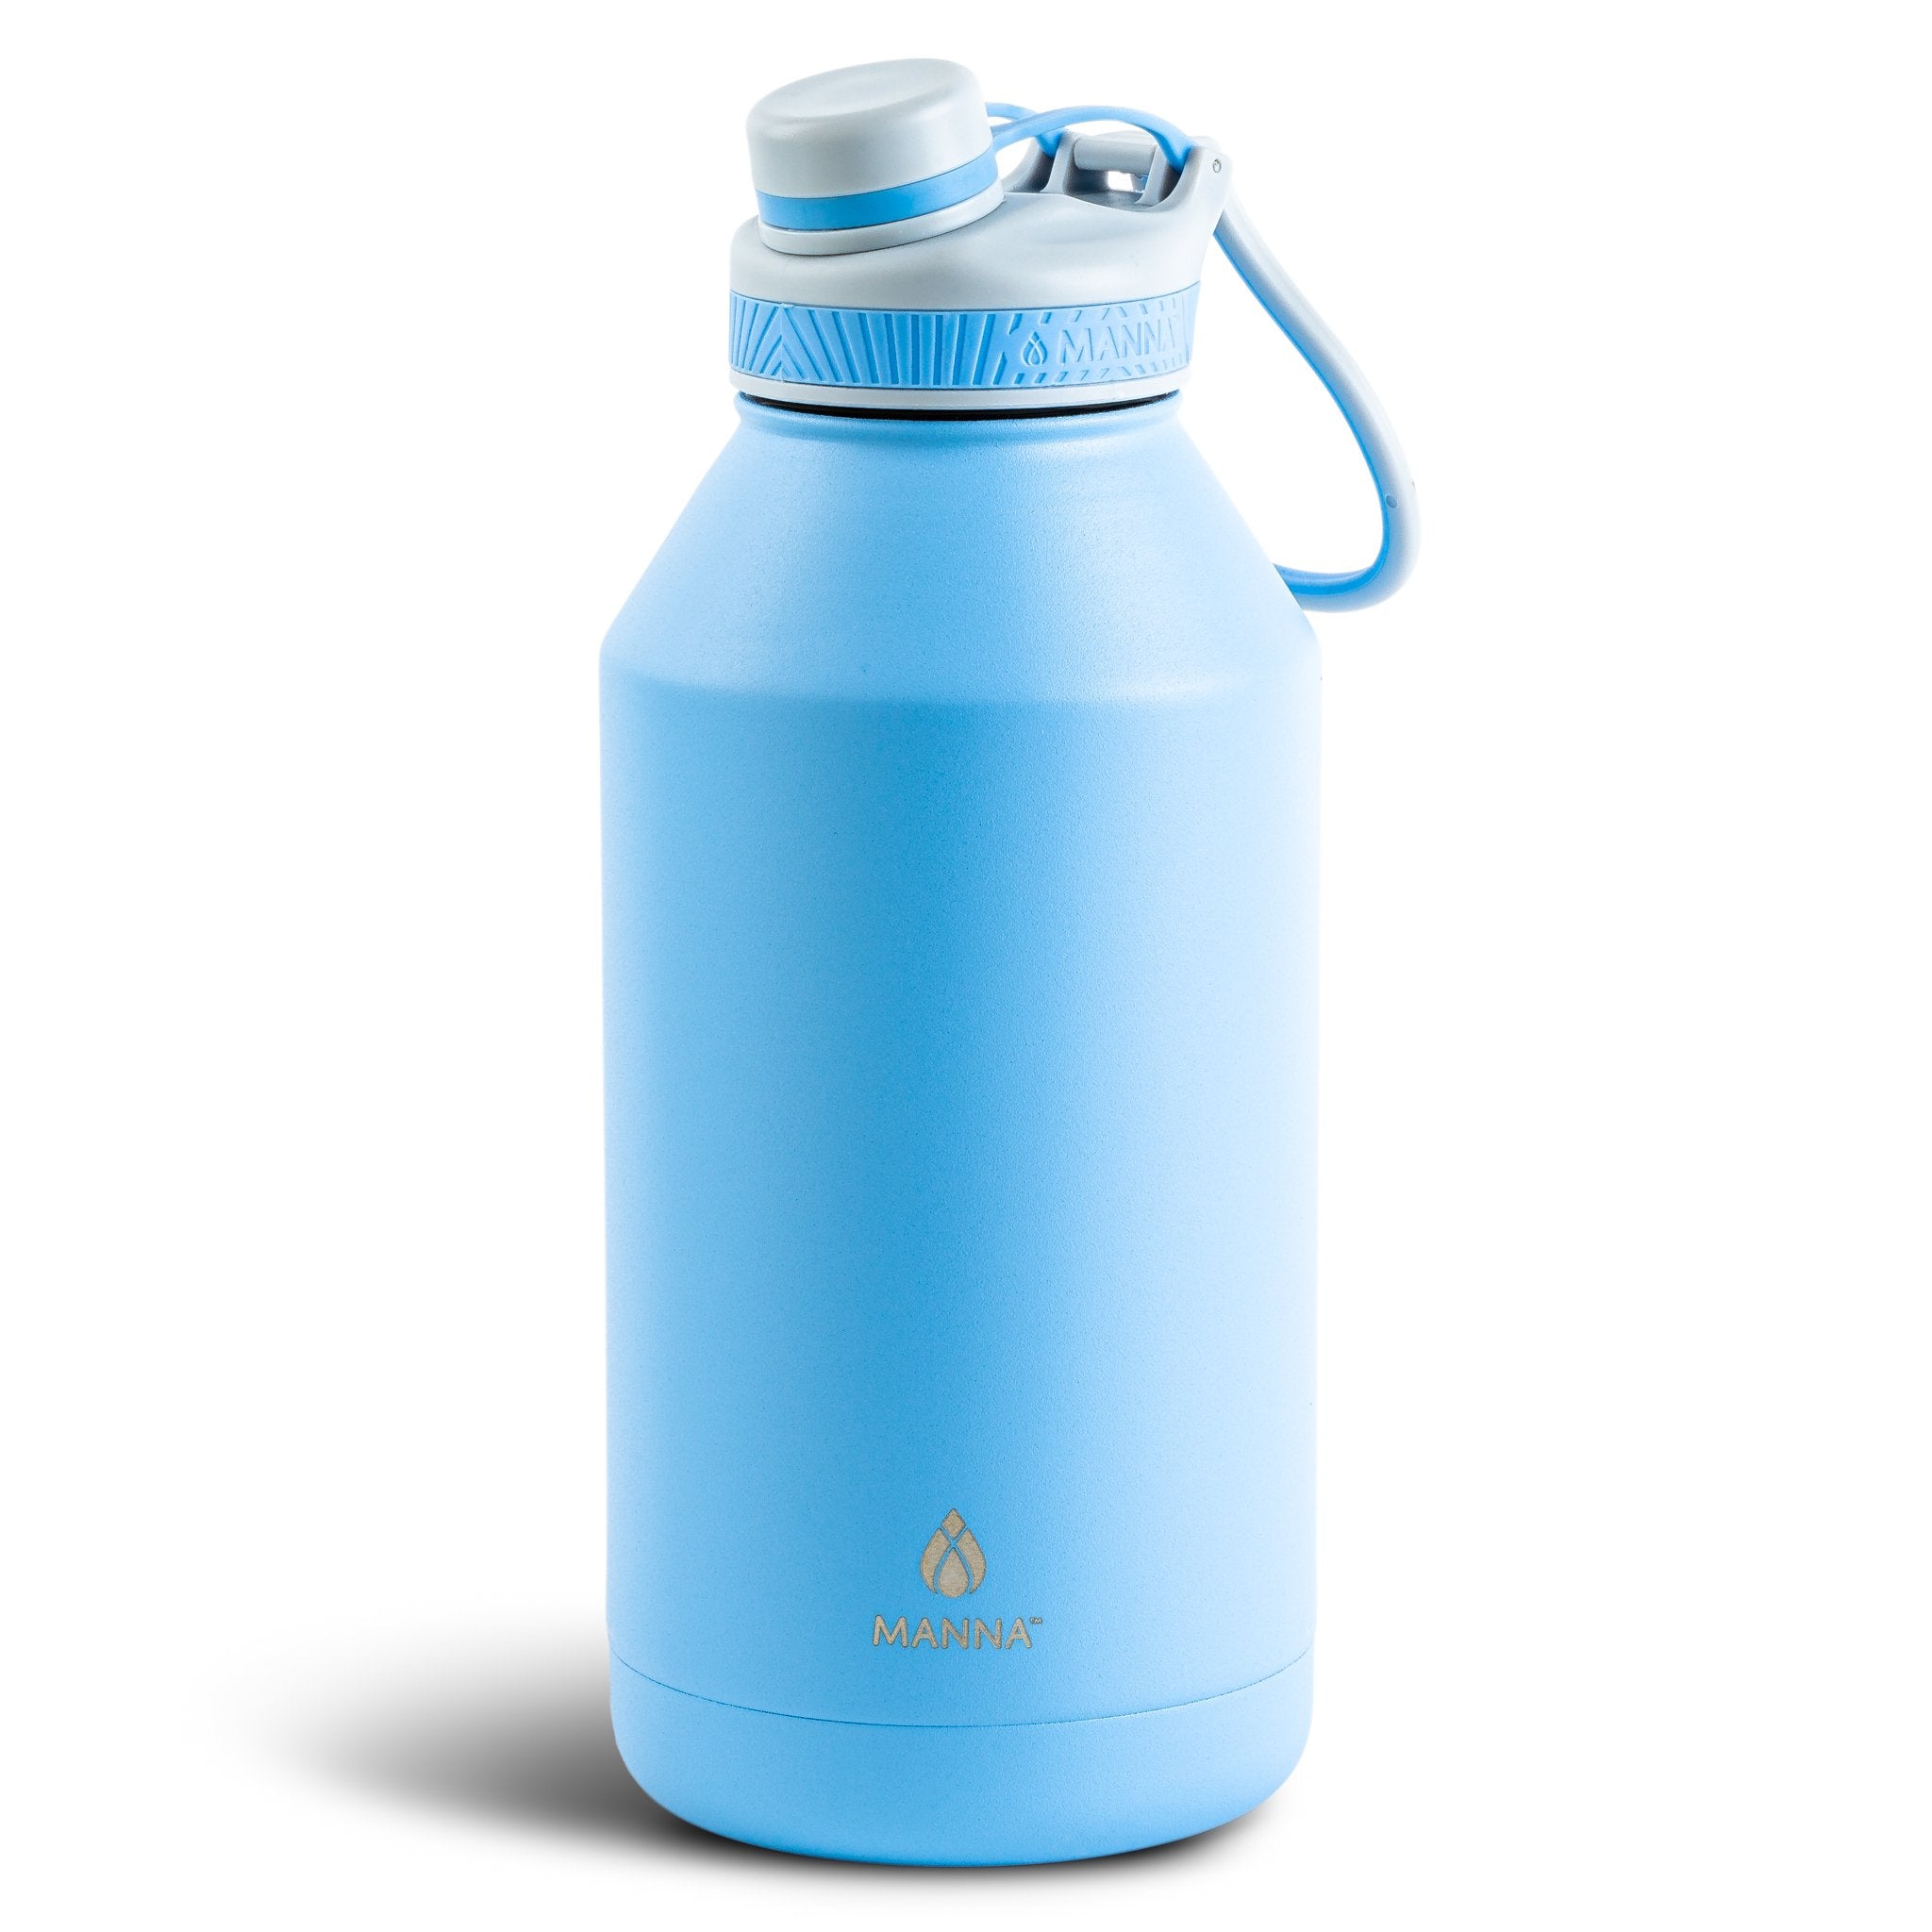 Manna Ranger Pro Powder Coated Water Bottle - Assorted Colors / Stainless Black